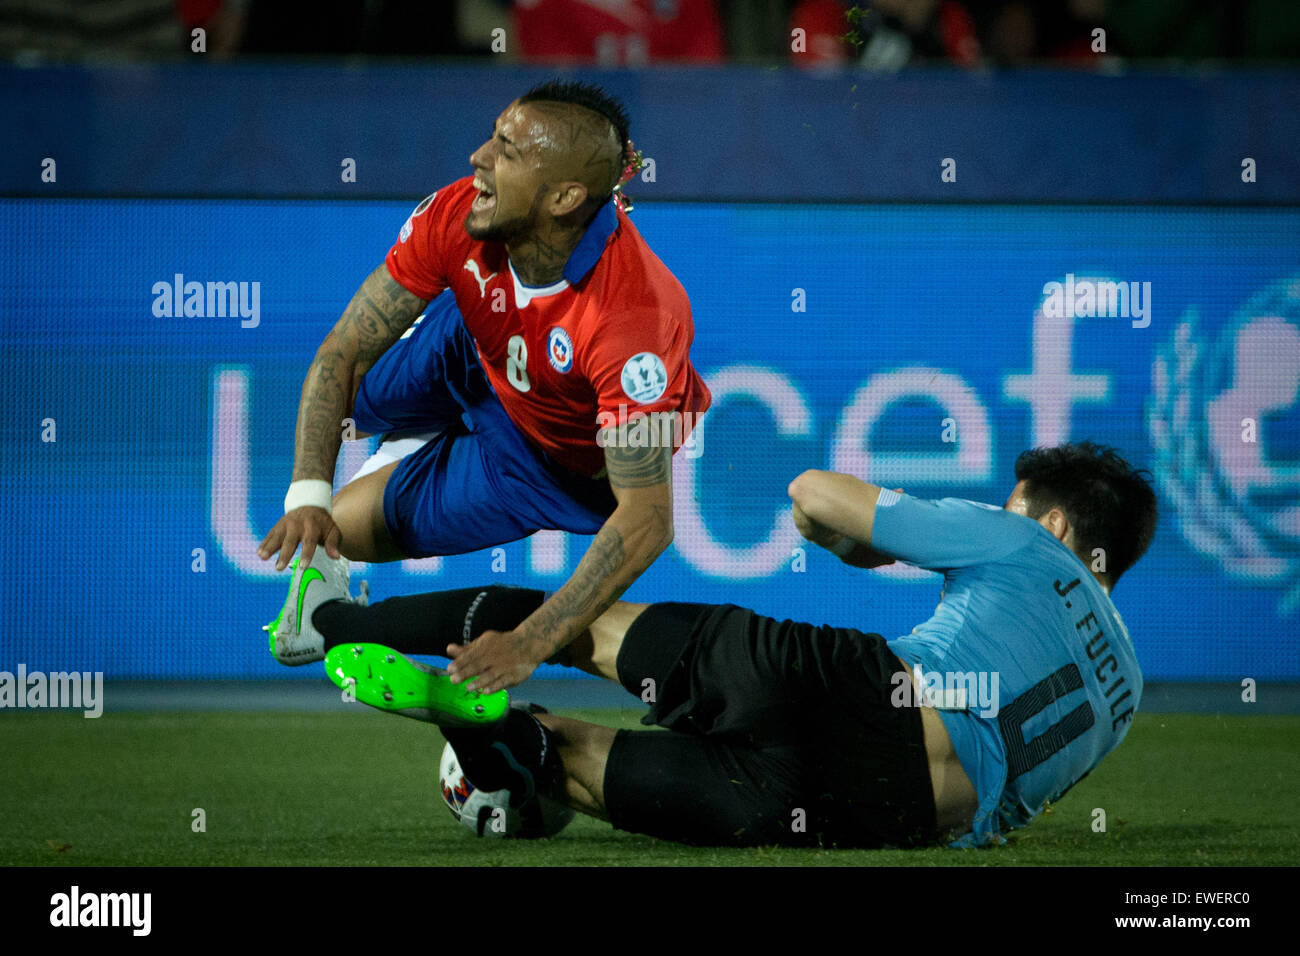 Santiago, Chile. 24th June, 2015. Arturo Vidal (Top) of Chile is tackled by Jorge Fucile of Uruguay during their quarterfinal at 2015 Copa America in Santiago, Chile, on June 24, 2015. Credit:  Pedro Mera/Xinhua/Alamy Live News Stock Photo